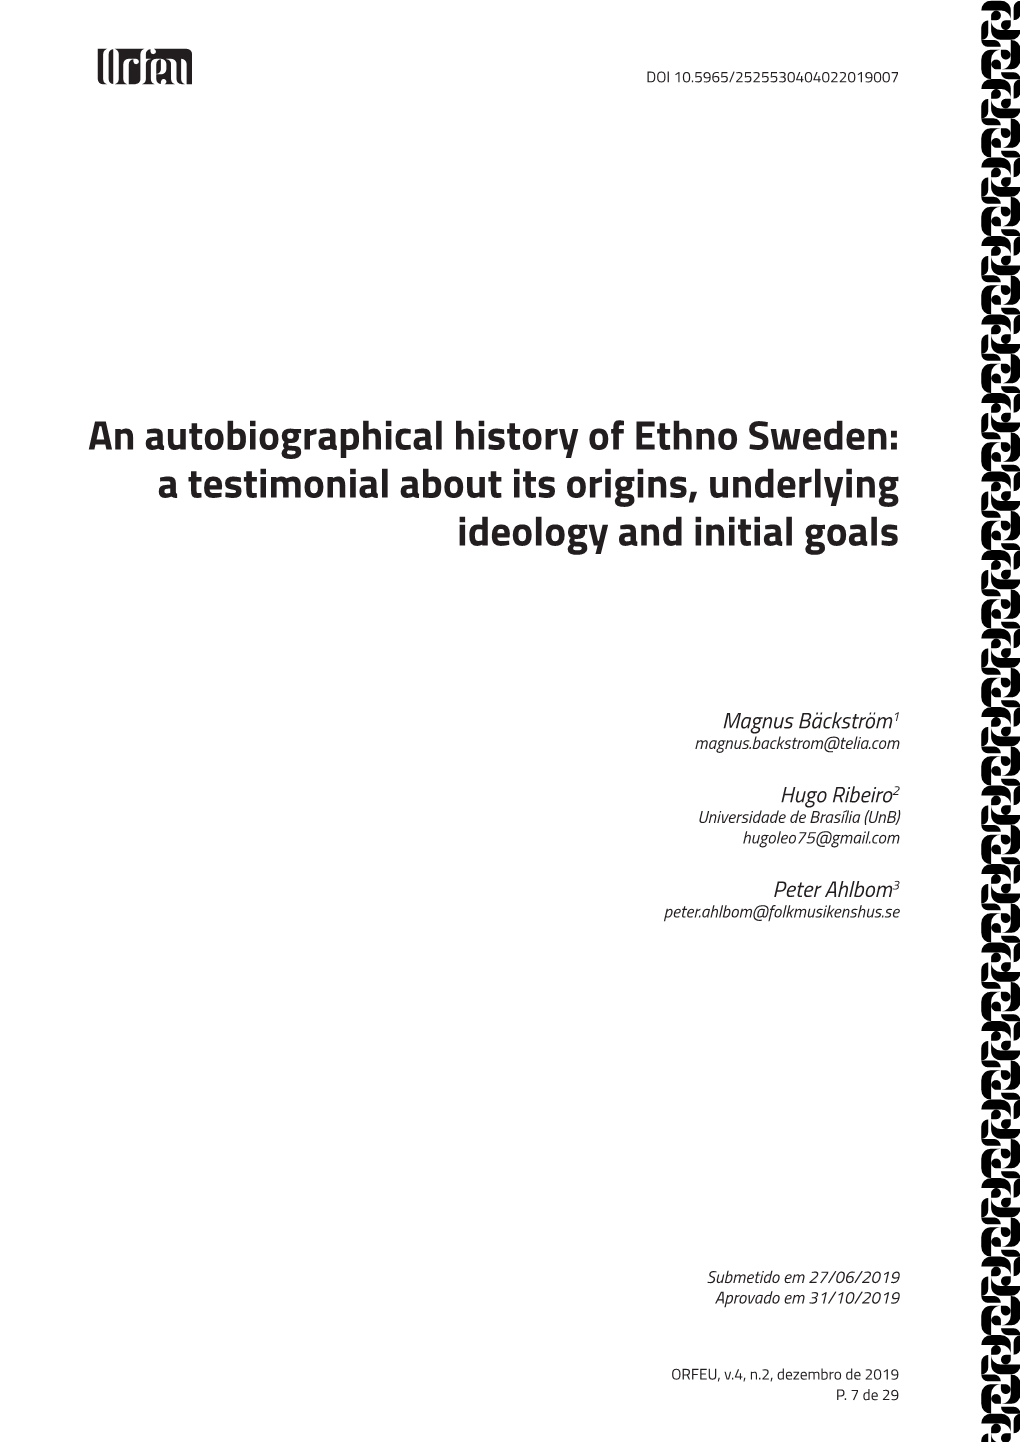 An Autobiographical History of Ethno Sweden: a Testimonial About Its Origins, Underlying Ideology and Initial Goals